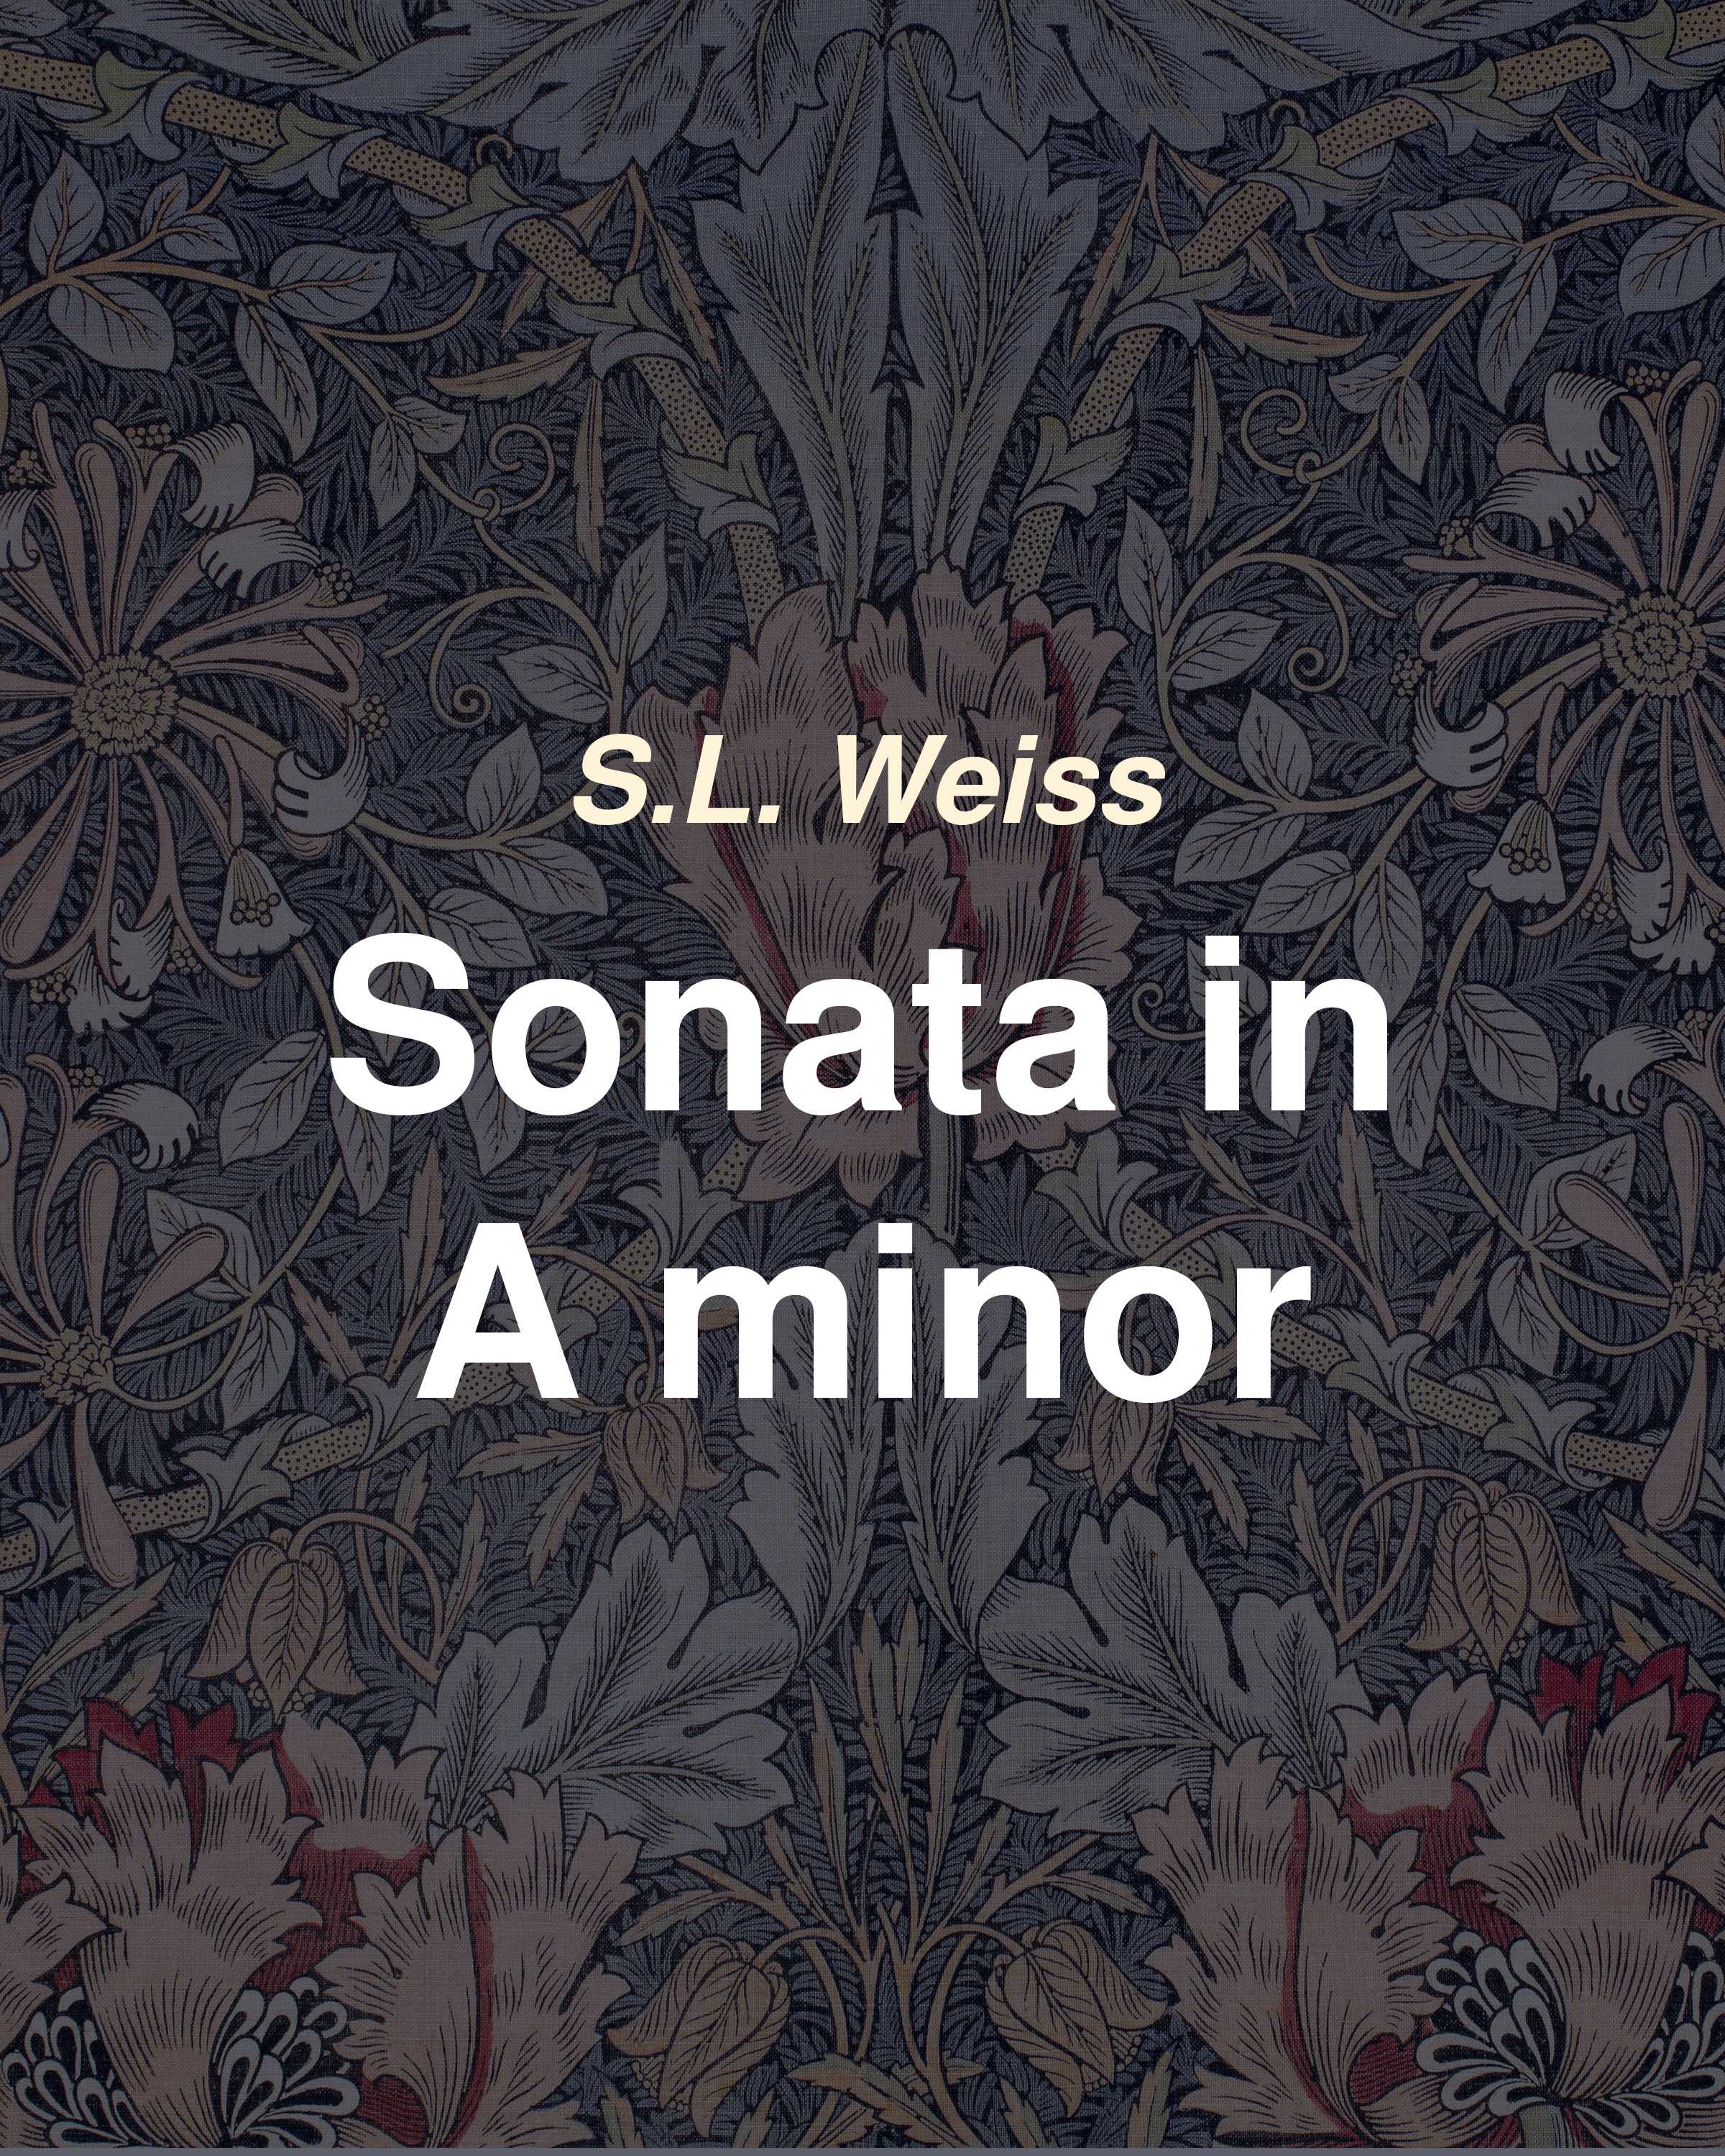 Sonata in A minor S.L. Weiss